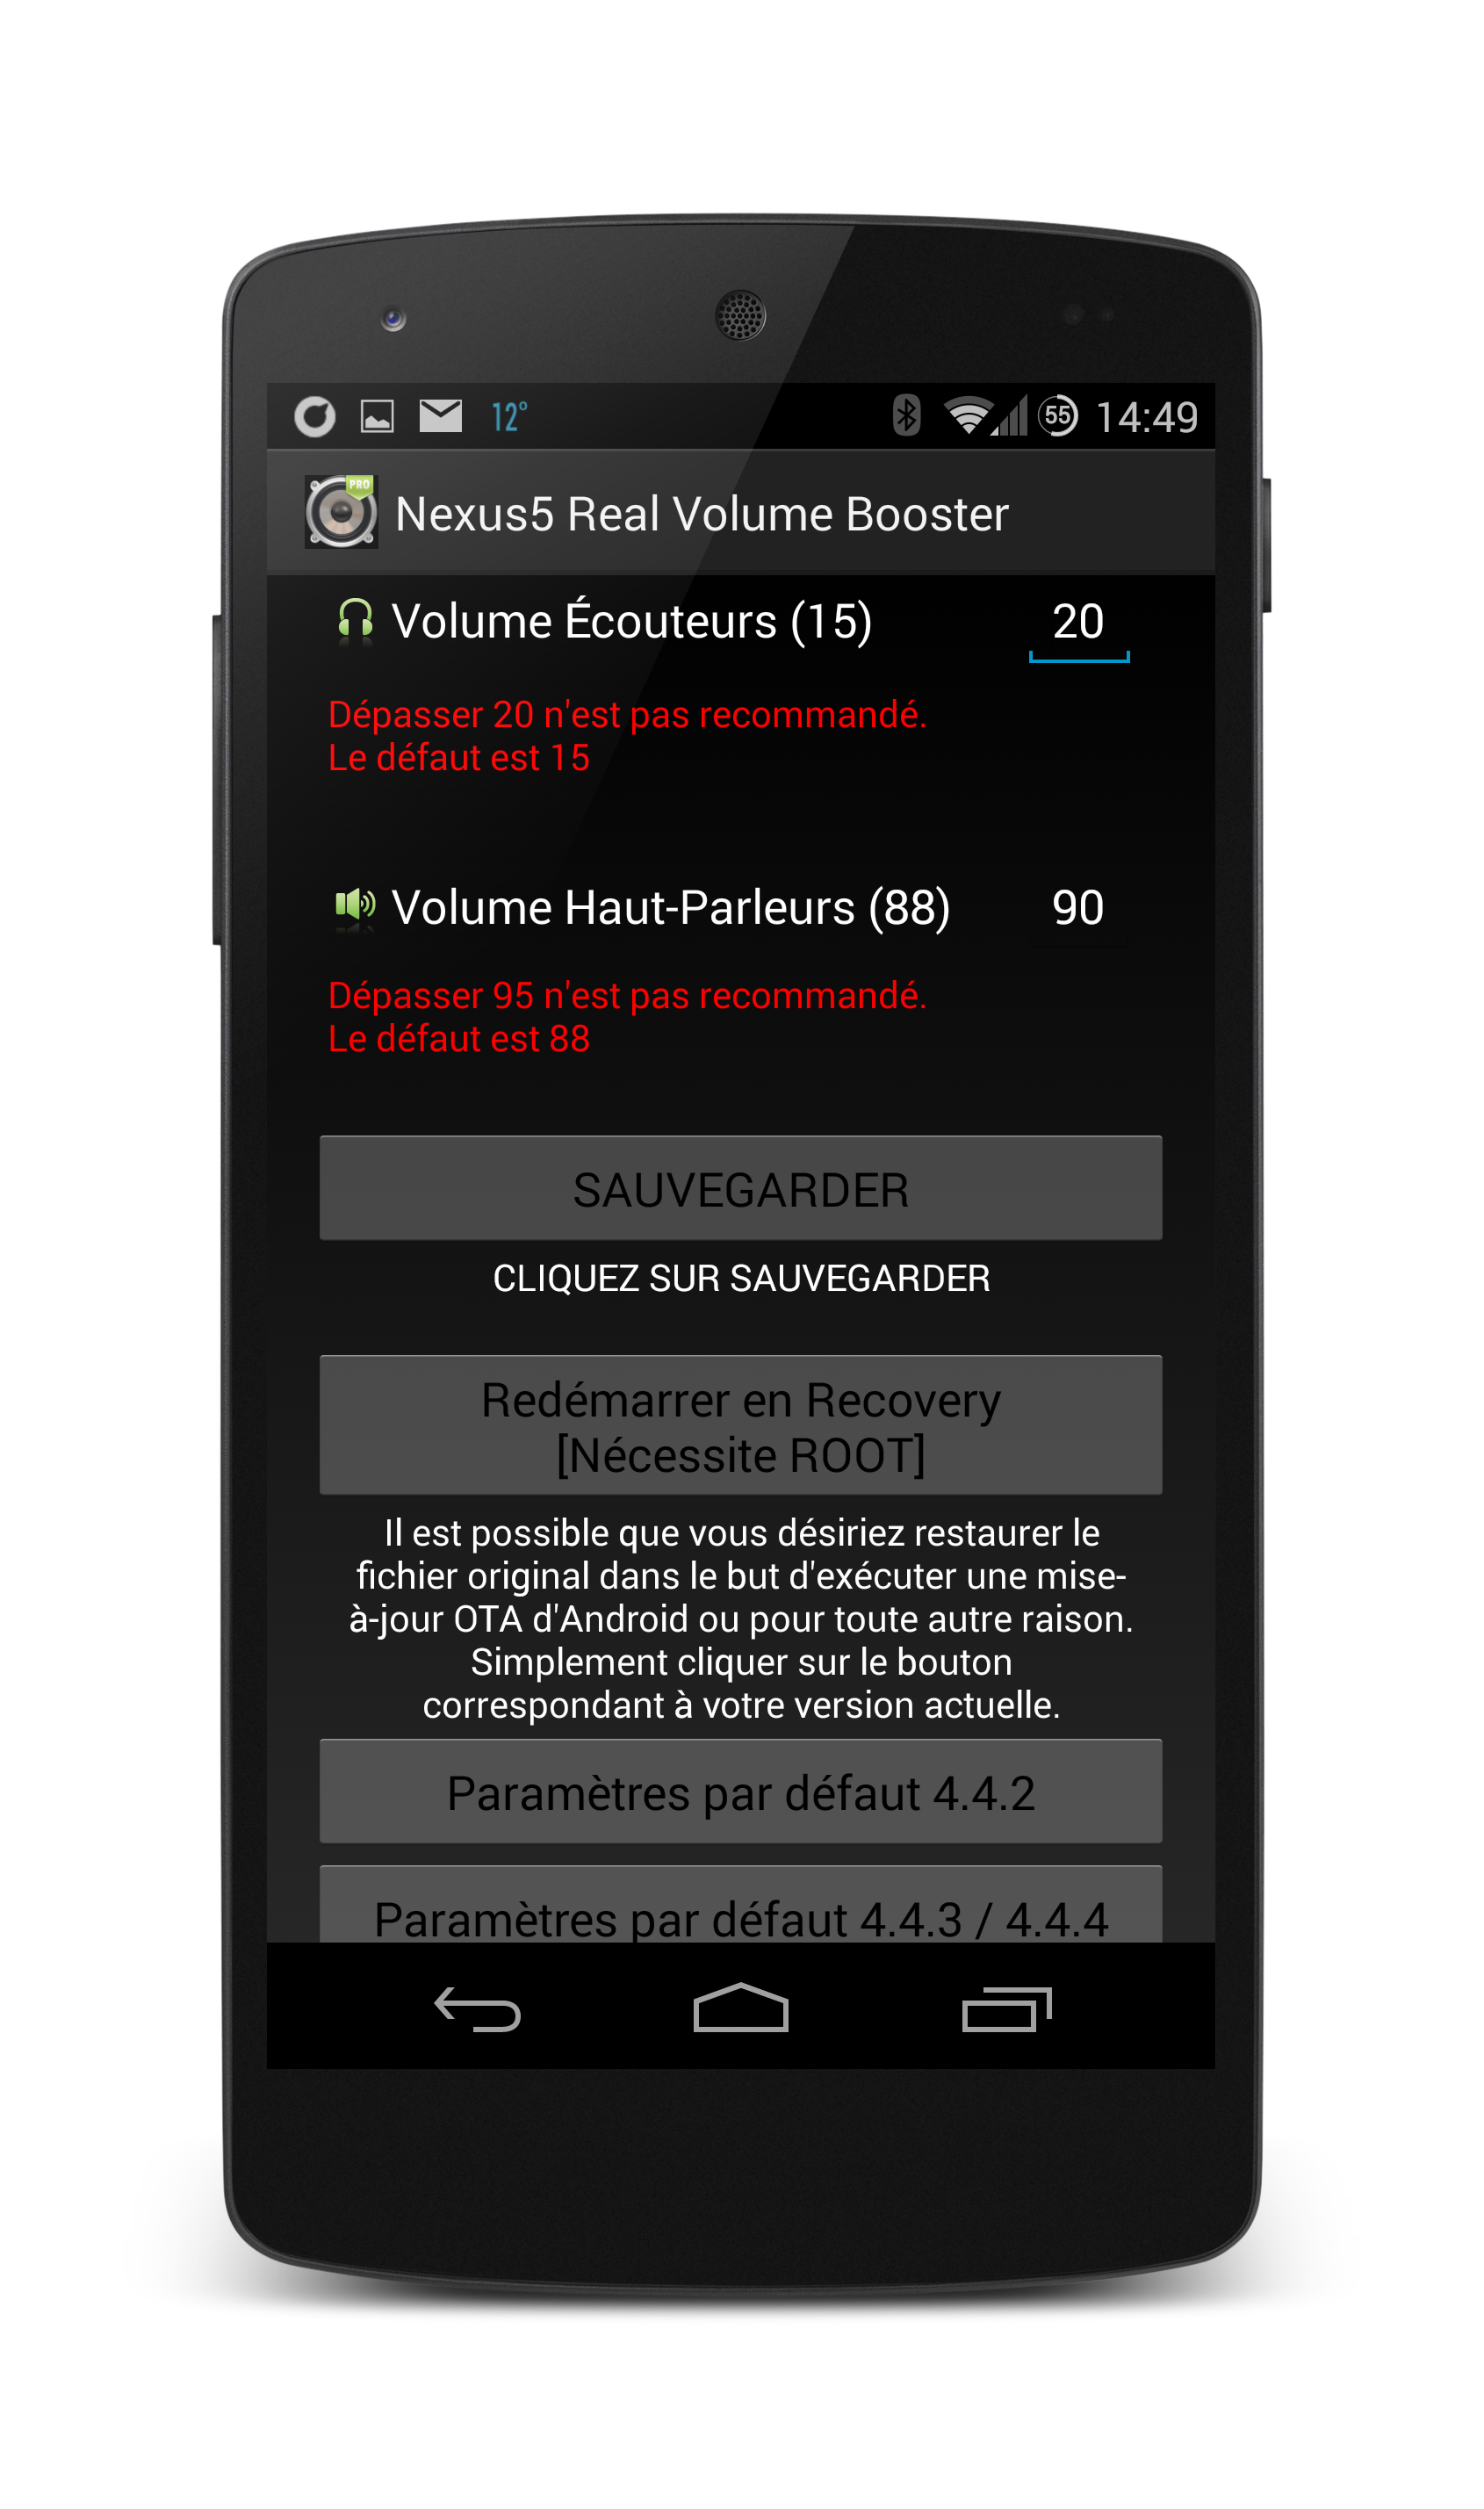 Android application Volume Boost Pro For Nexus 5™ screenshort